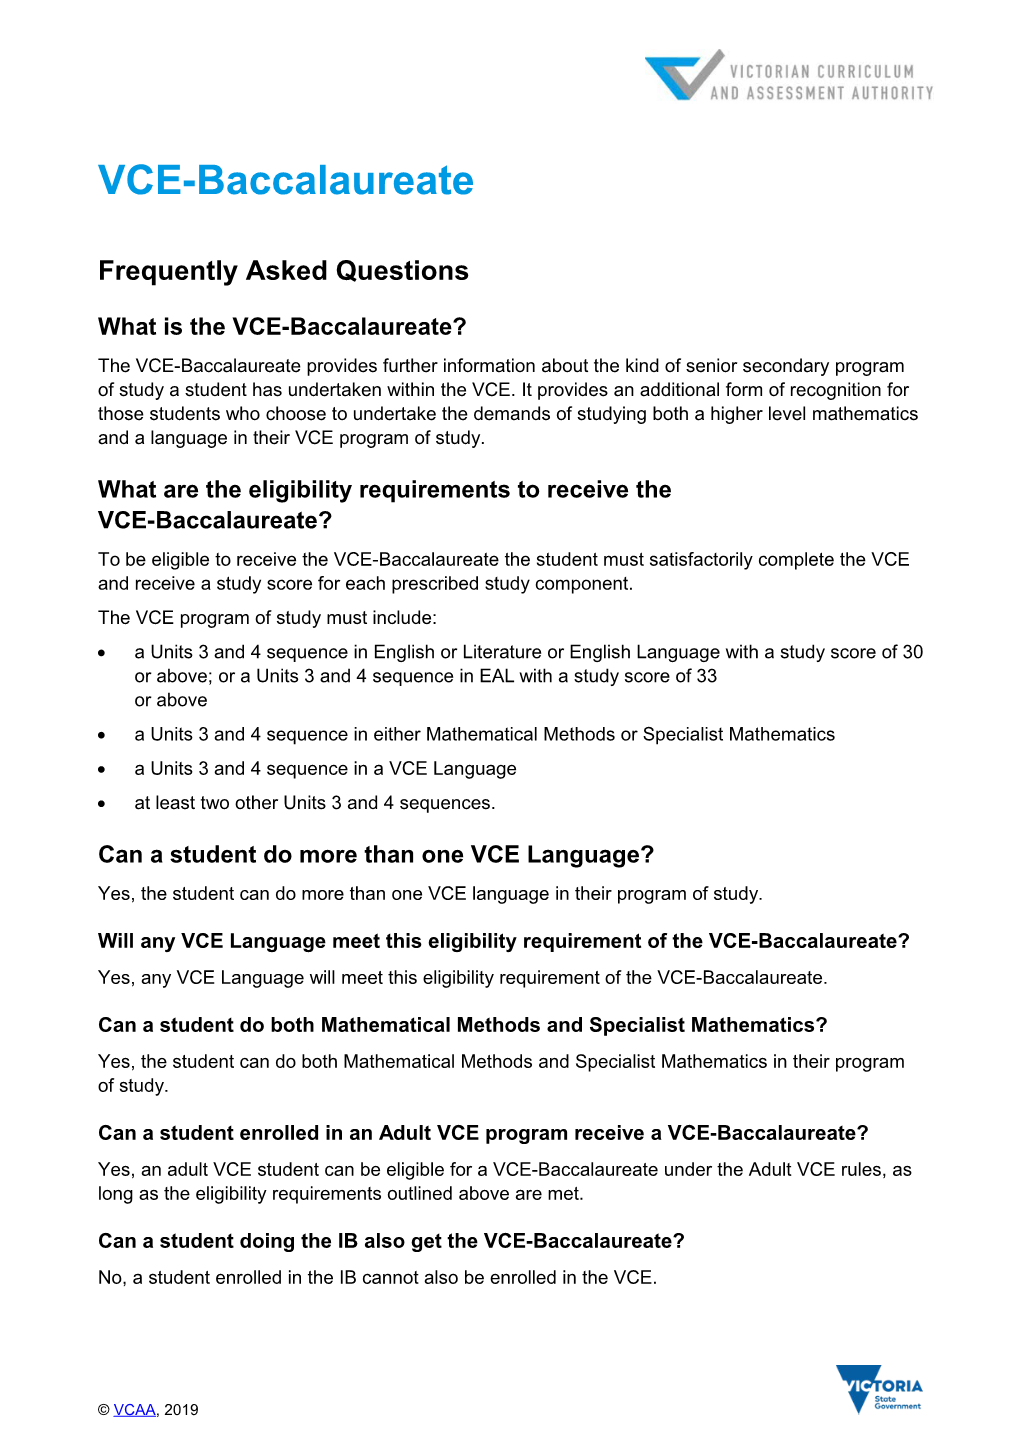 VCE-Baccalaureate - Frequently Asked Questions